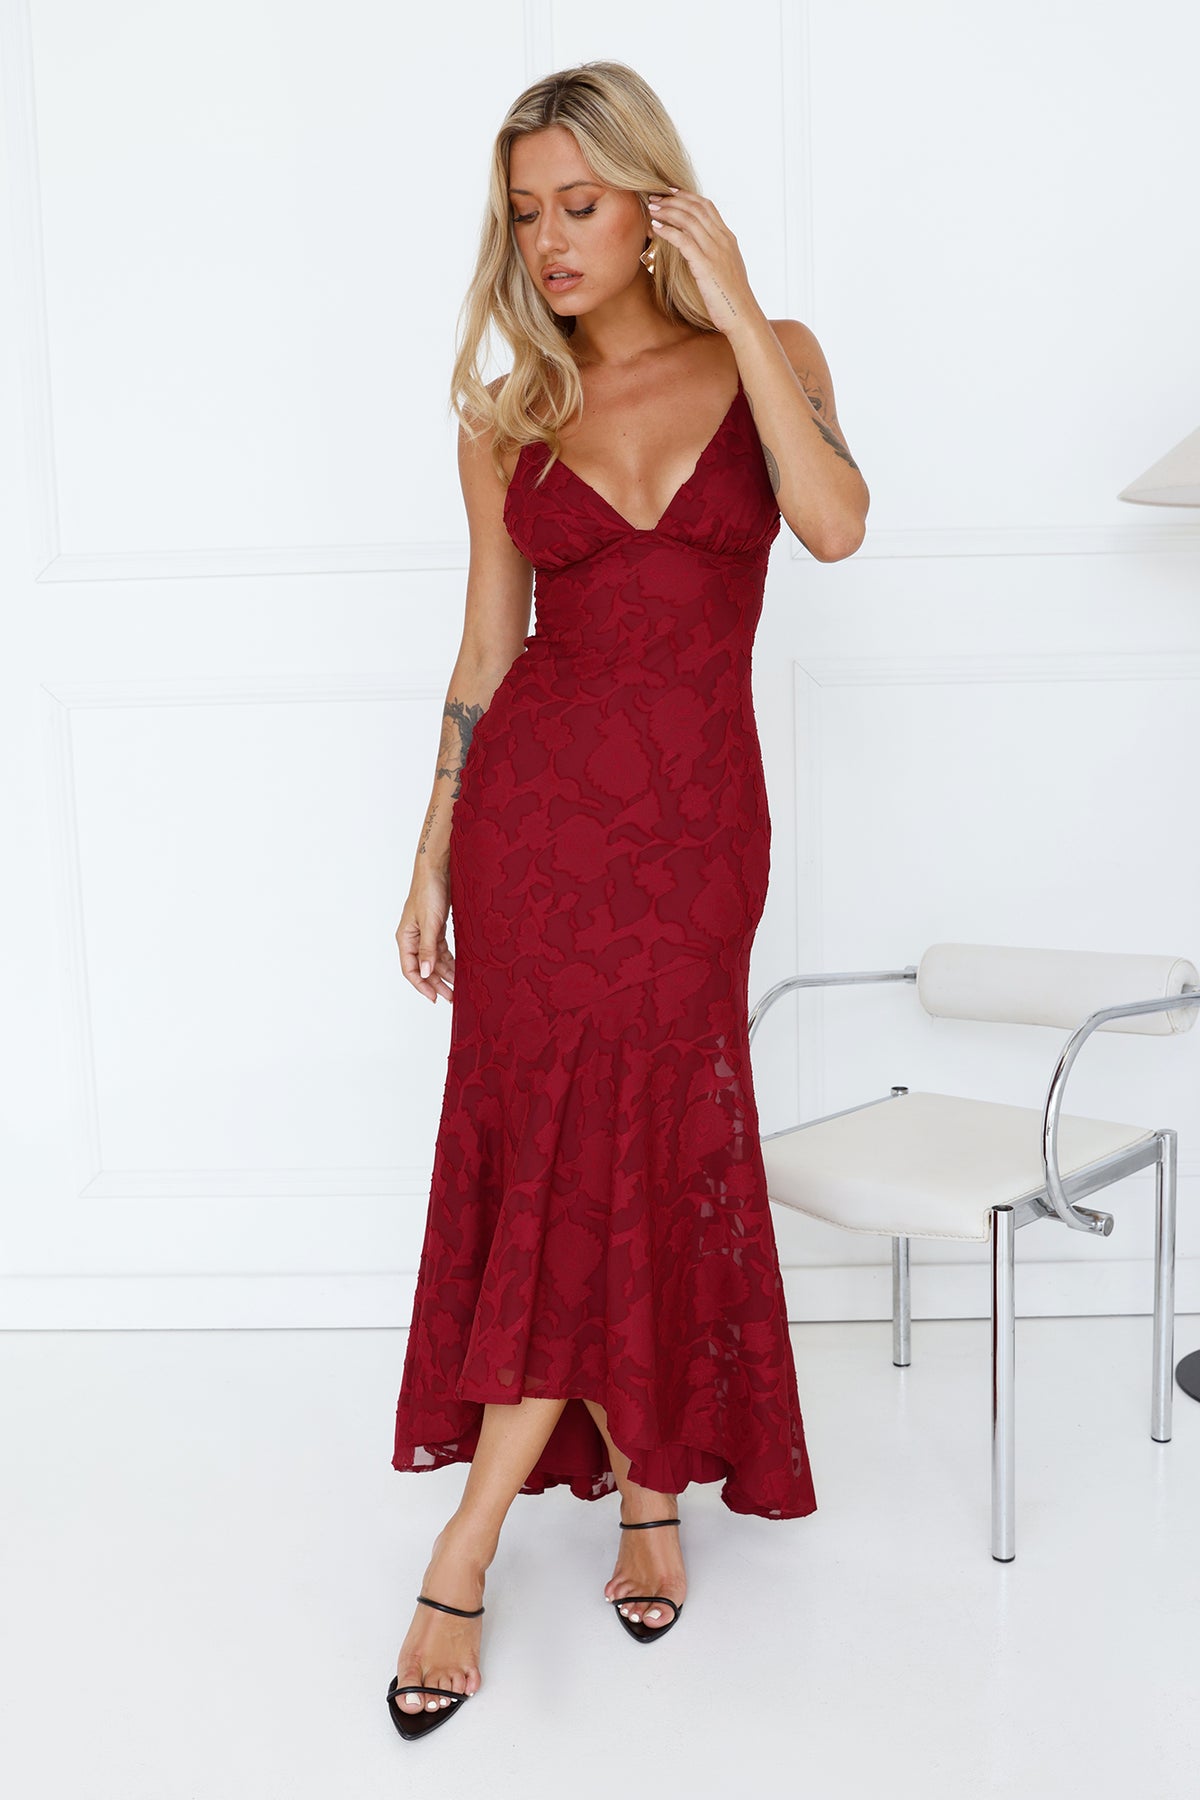 Shop Formal Dress - Events Countryside Maxi Dress Wine fourth image